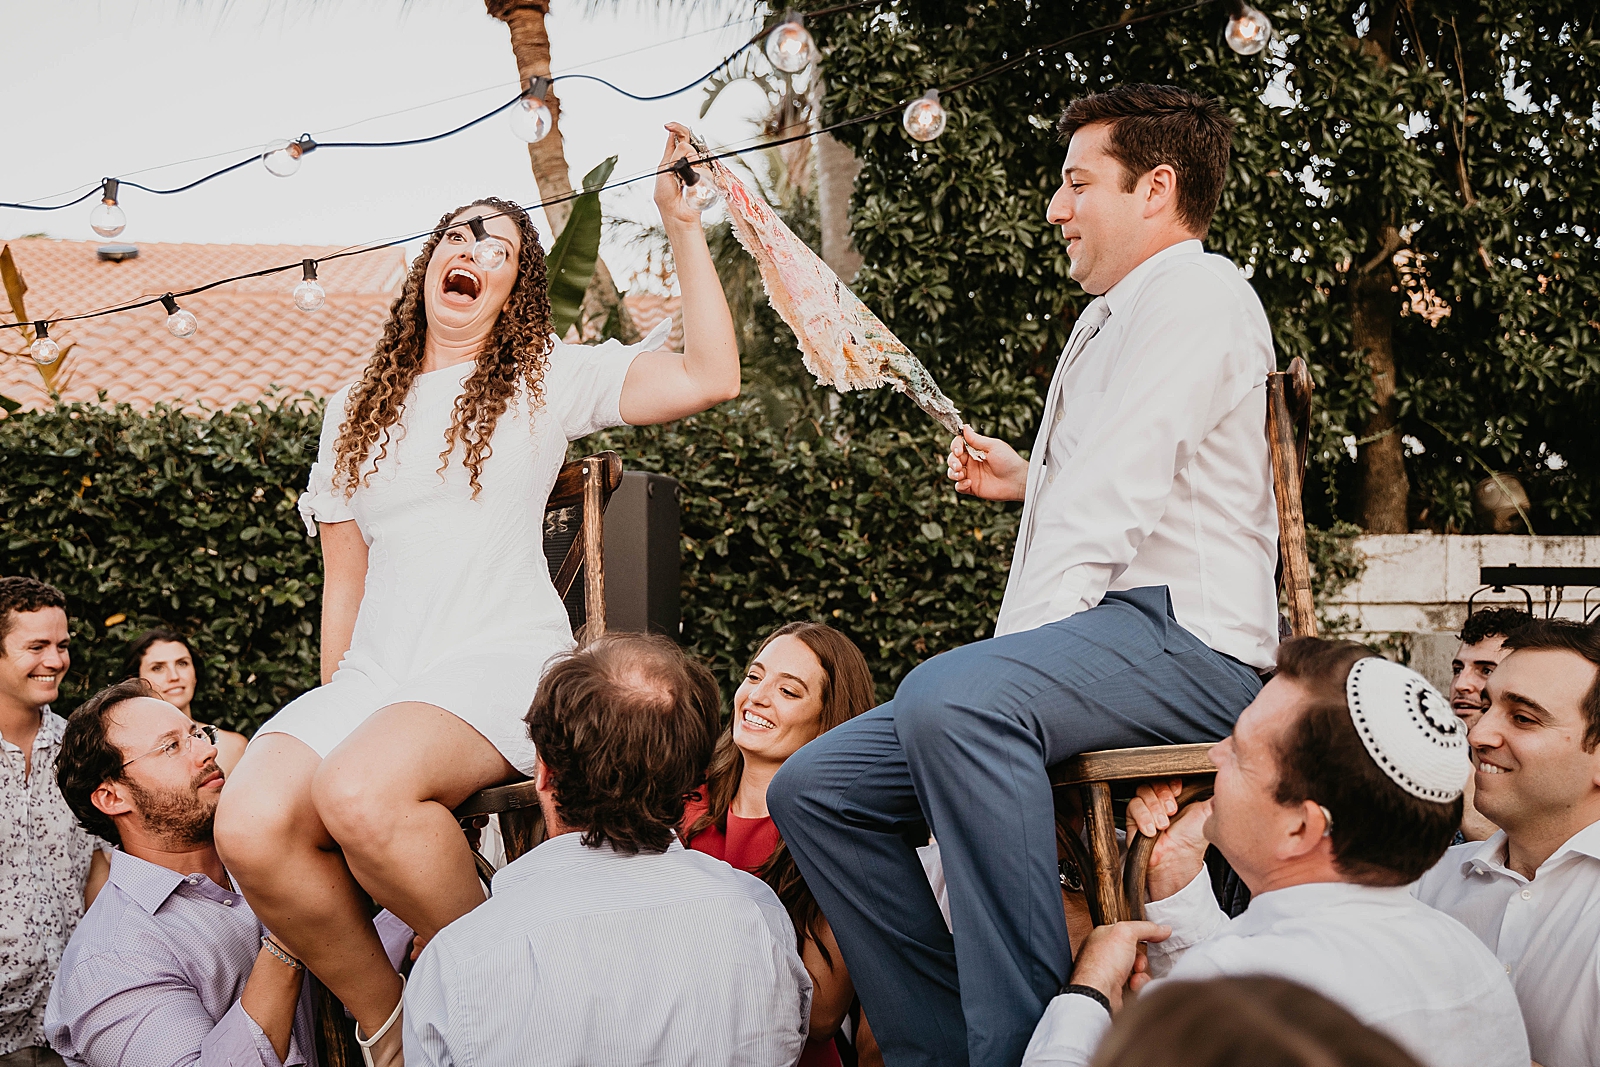 Bride and Groom sitting on chairs lifted up by friends and family for Hora Intimate South Florida Wedding Photography captured by South Florida Wedding Photographer Krystal Capone Photography 